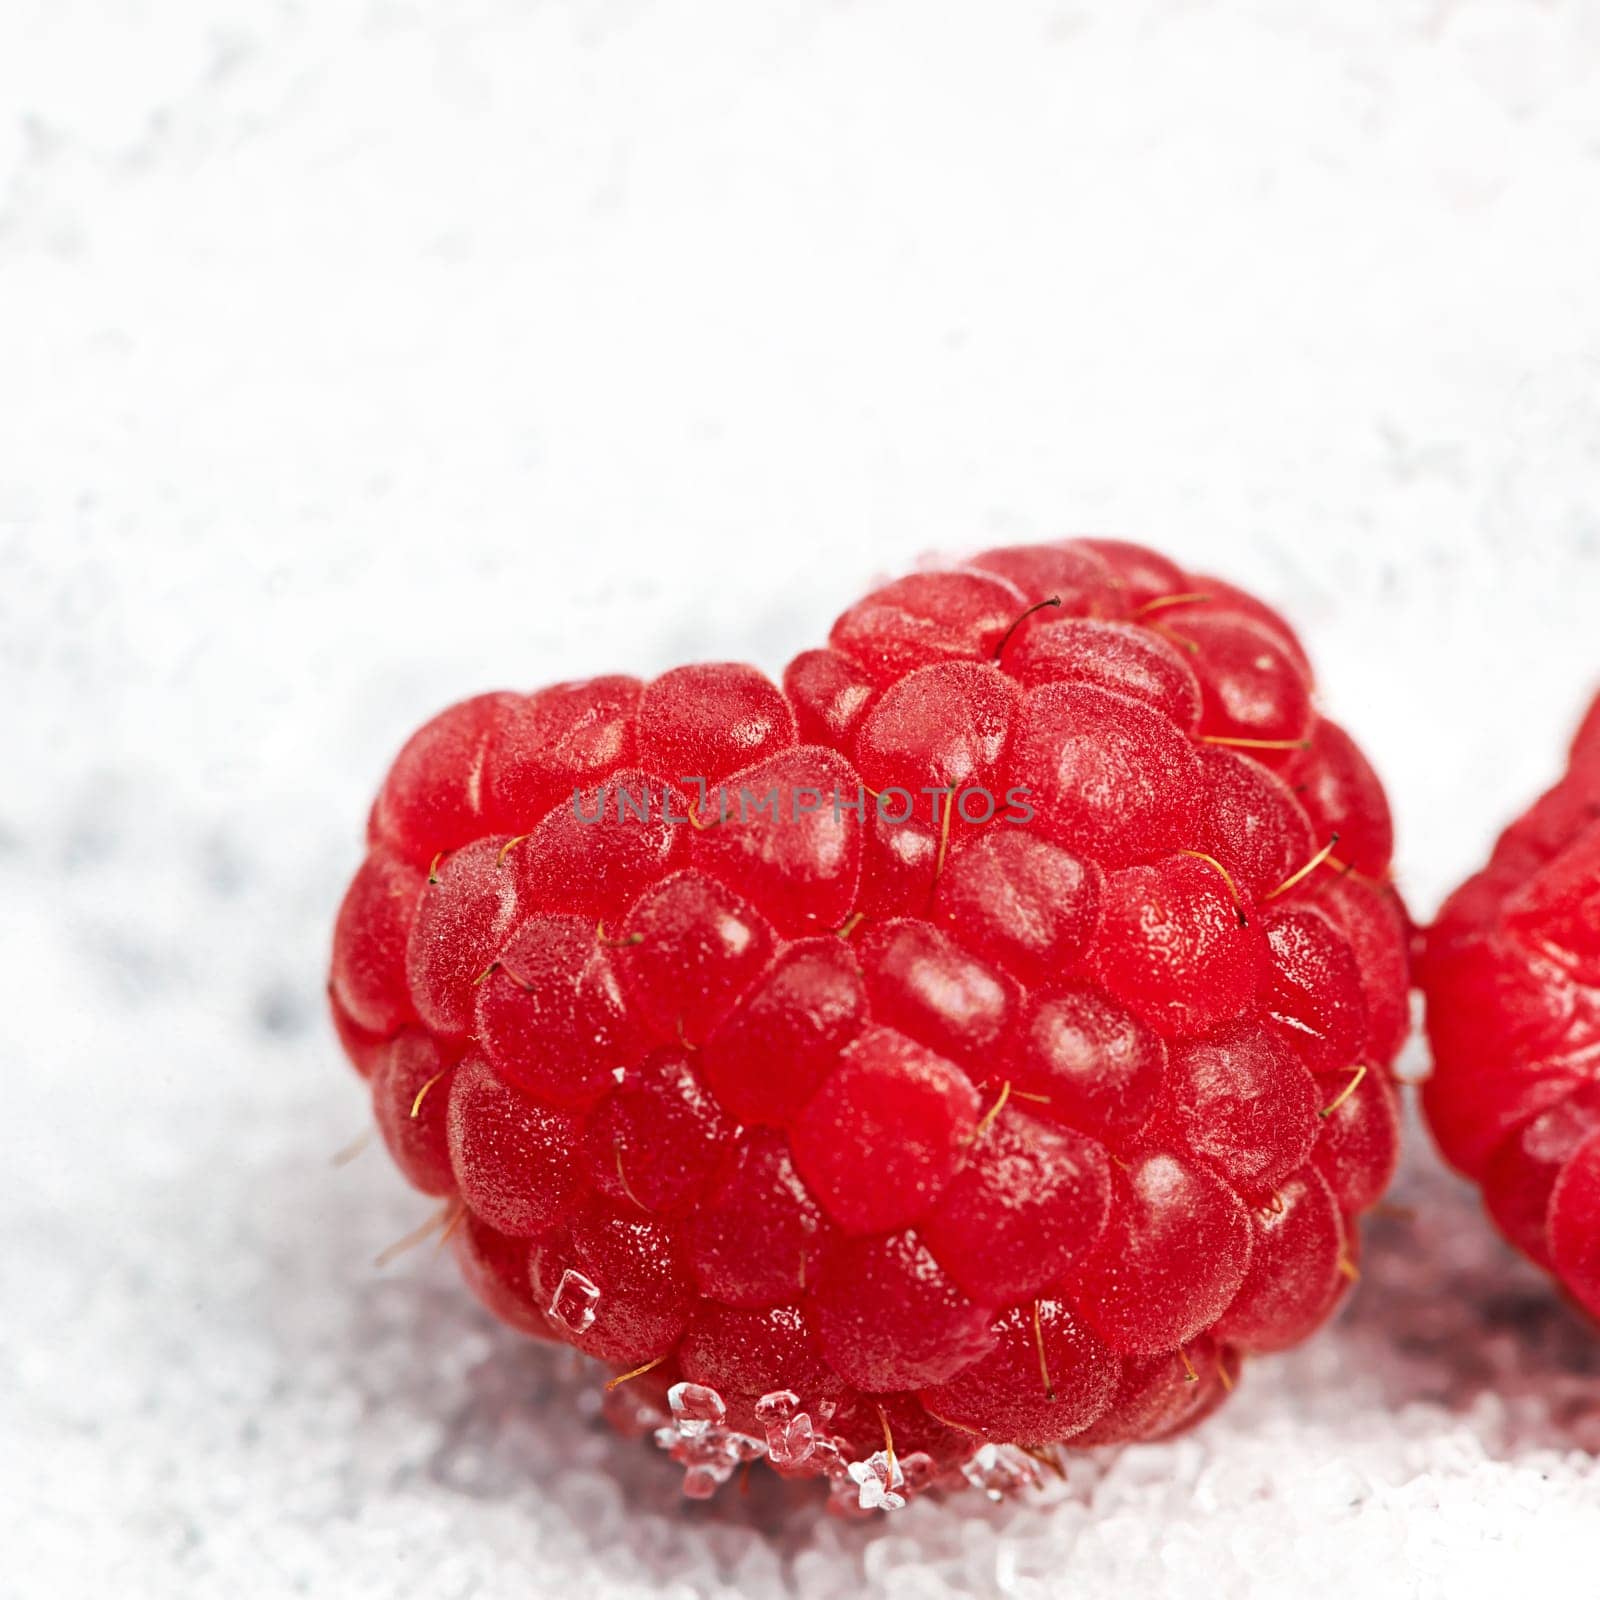 Raspberry, fruit and diet with sugar for health with wellness for nutrition with food. Produce, vitamin c and vegan with weight loss for healthy eating with vegetarian, juice and cuisine for dessert.